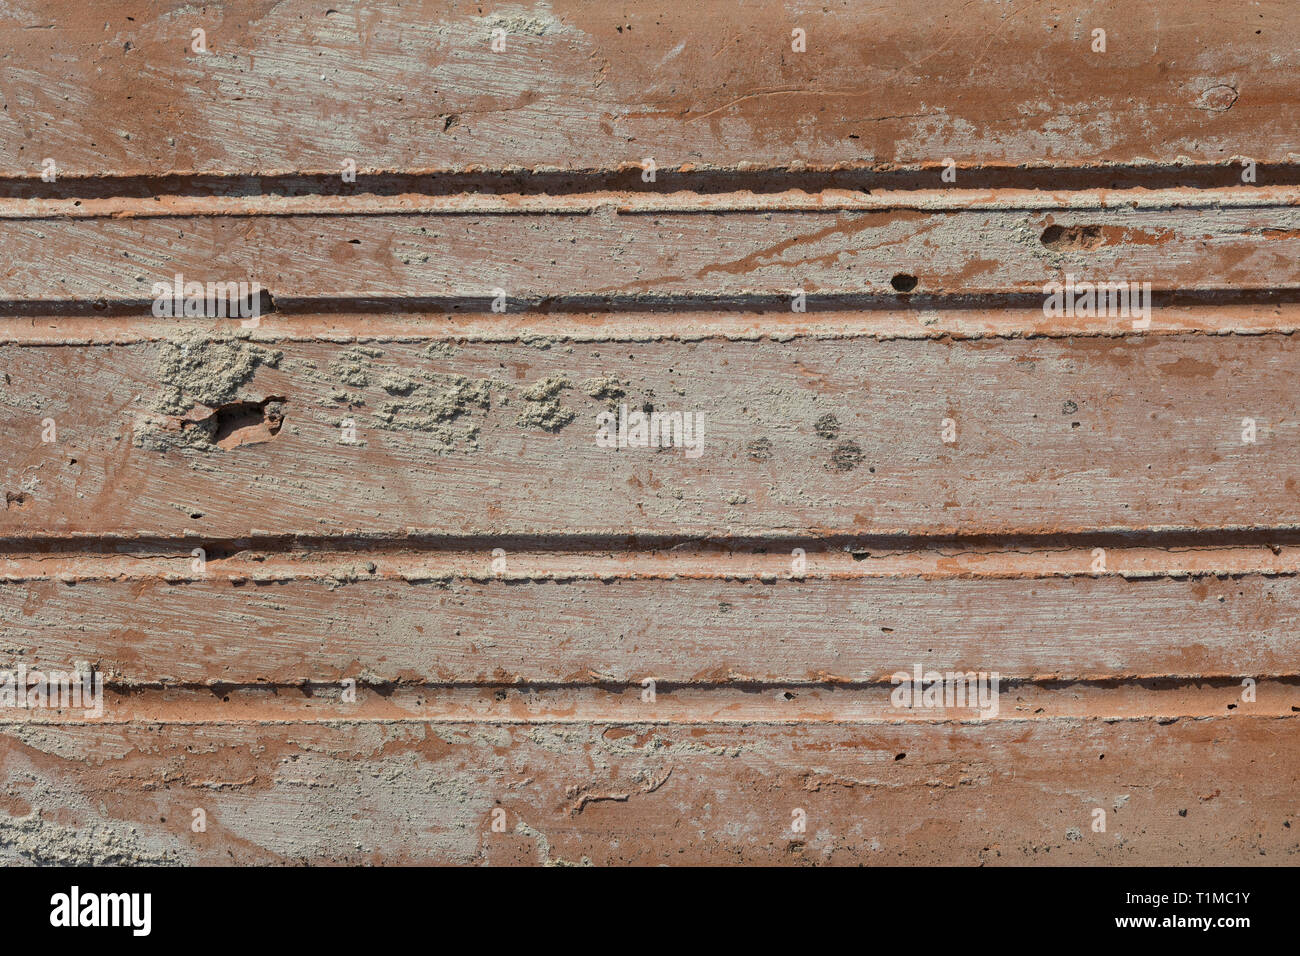 Texture in Close-up Of Old Dirty, Crumbly, Weathered Brick in Harsh Direct Sunlight Stock Photo